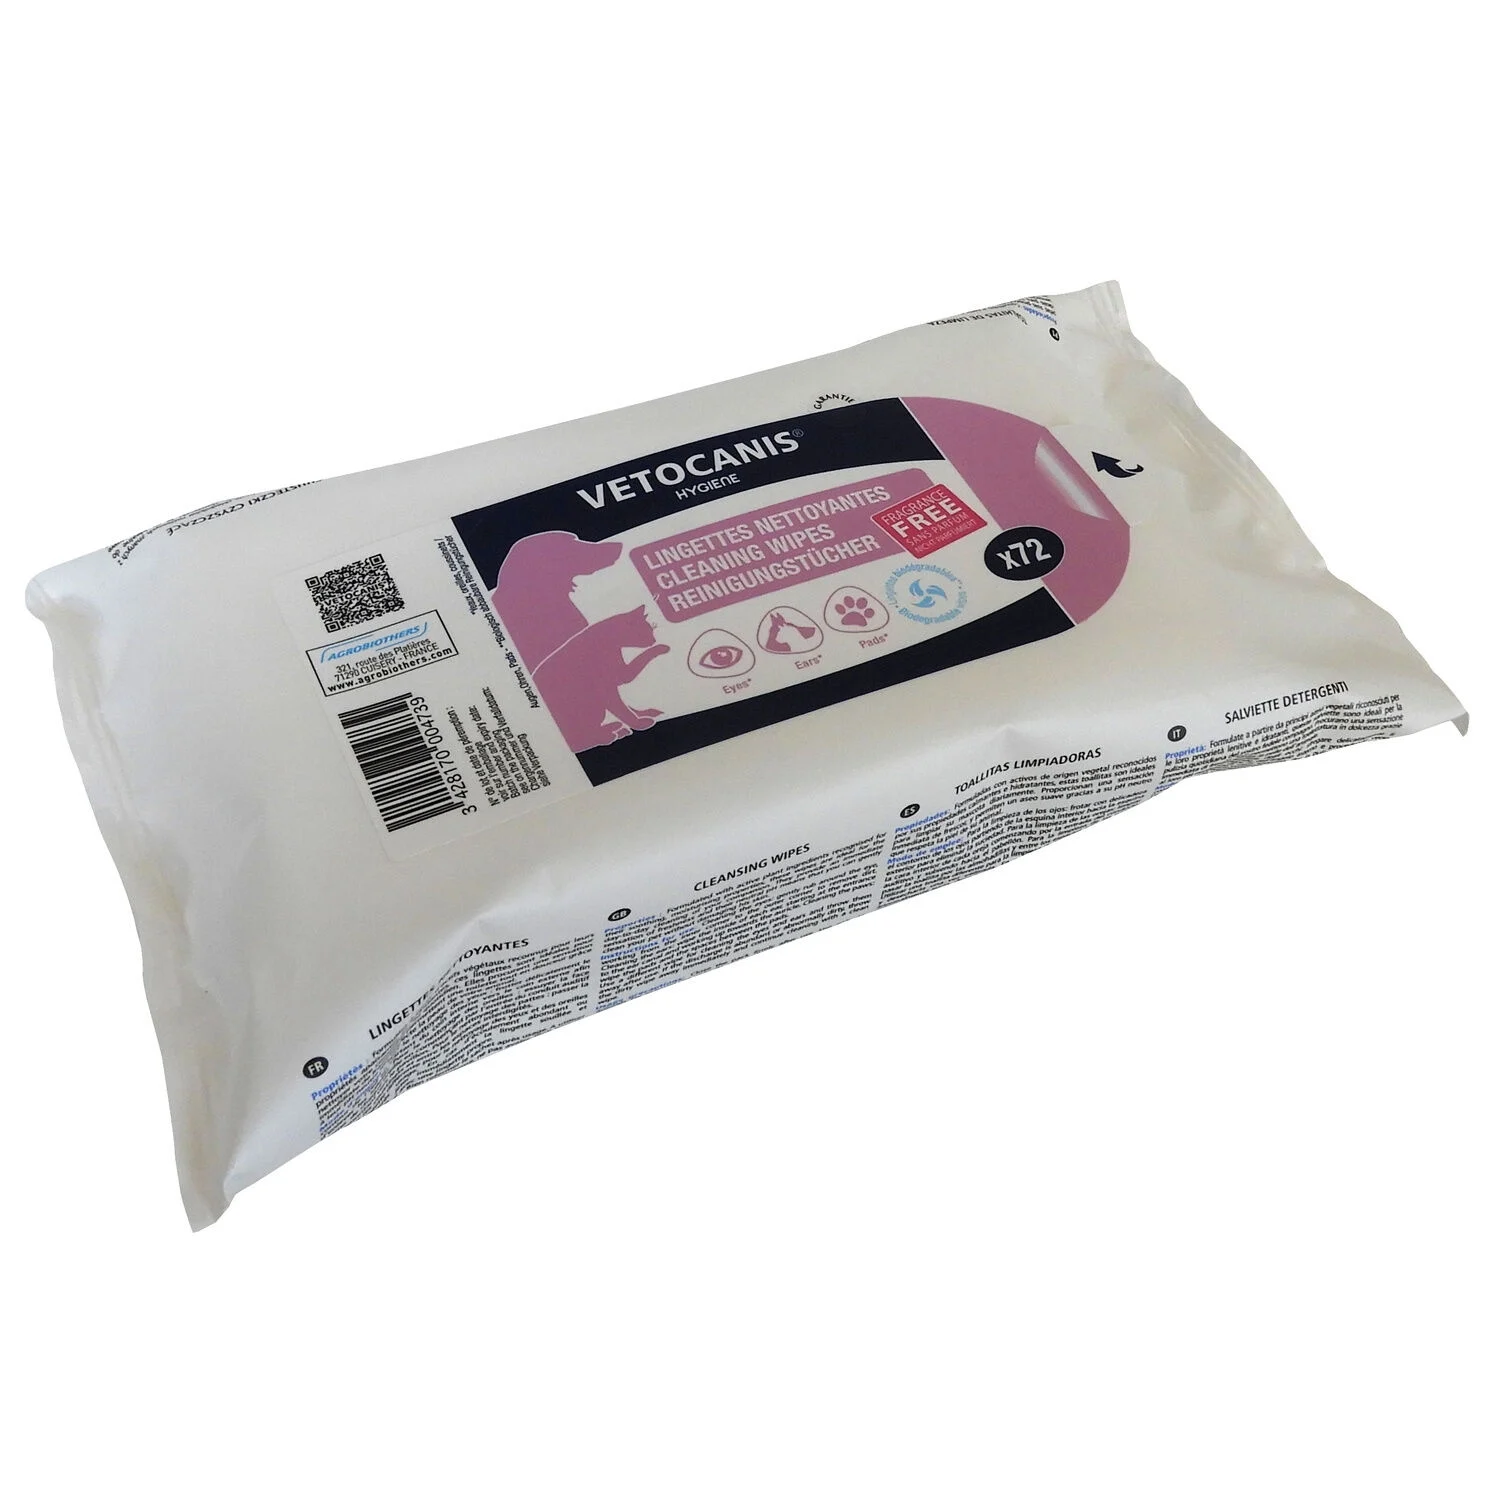 Large Hygiene Cleaning Wipes for Dogs and Cats X12 - Vetocanis